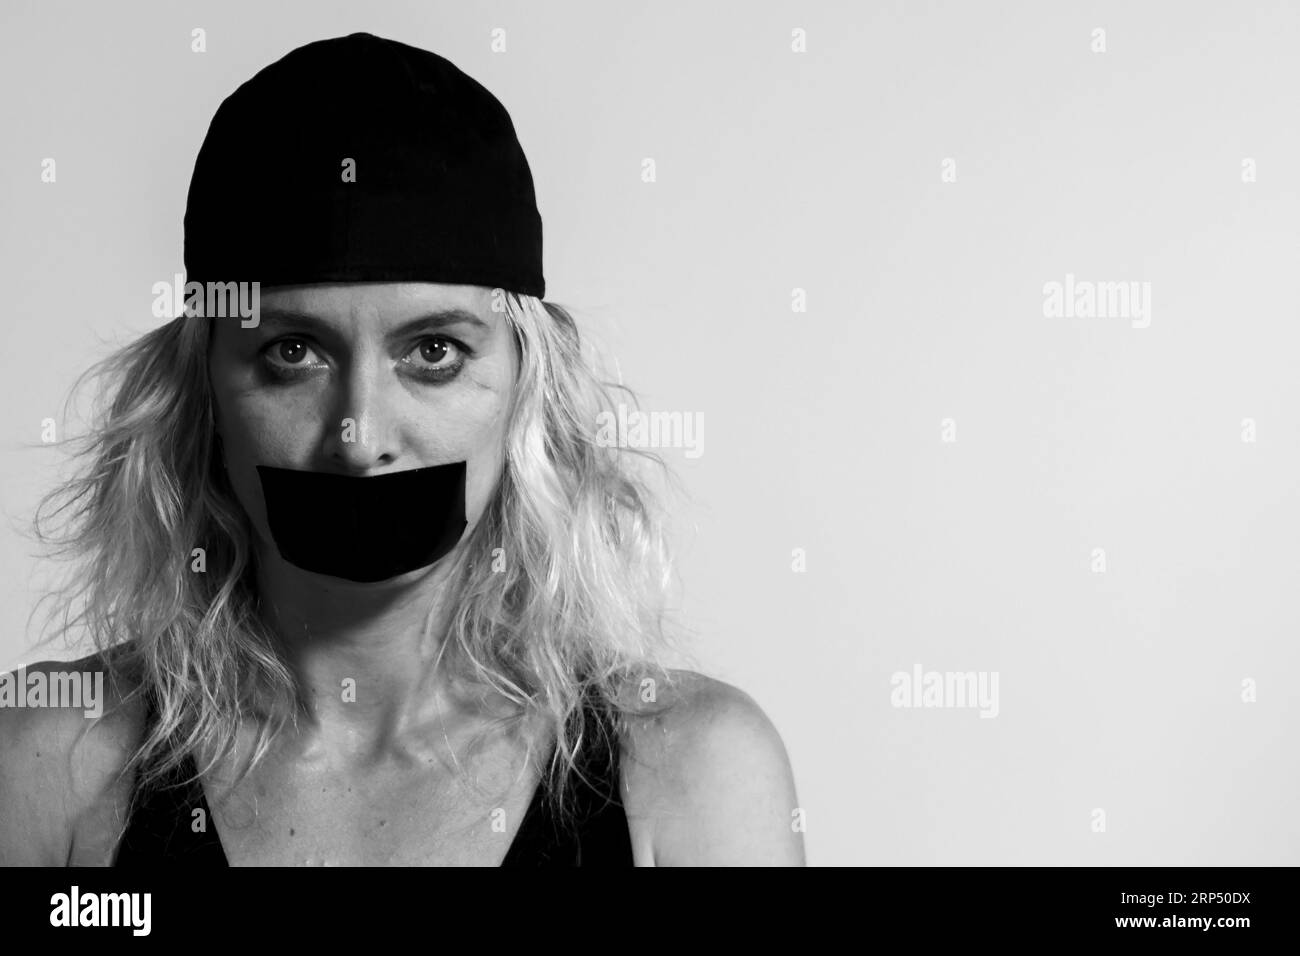 Light-eyed blonde woman with a cap and her mouth taped so she can't speak Stock Photo